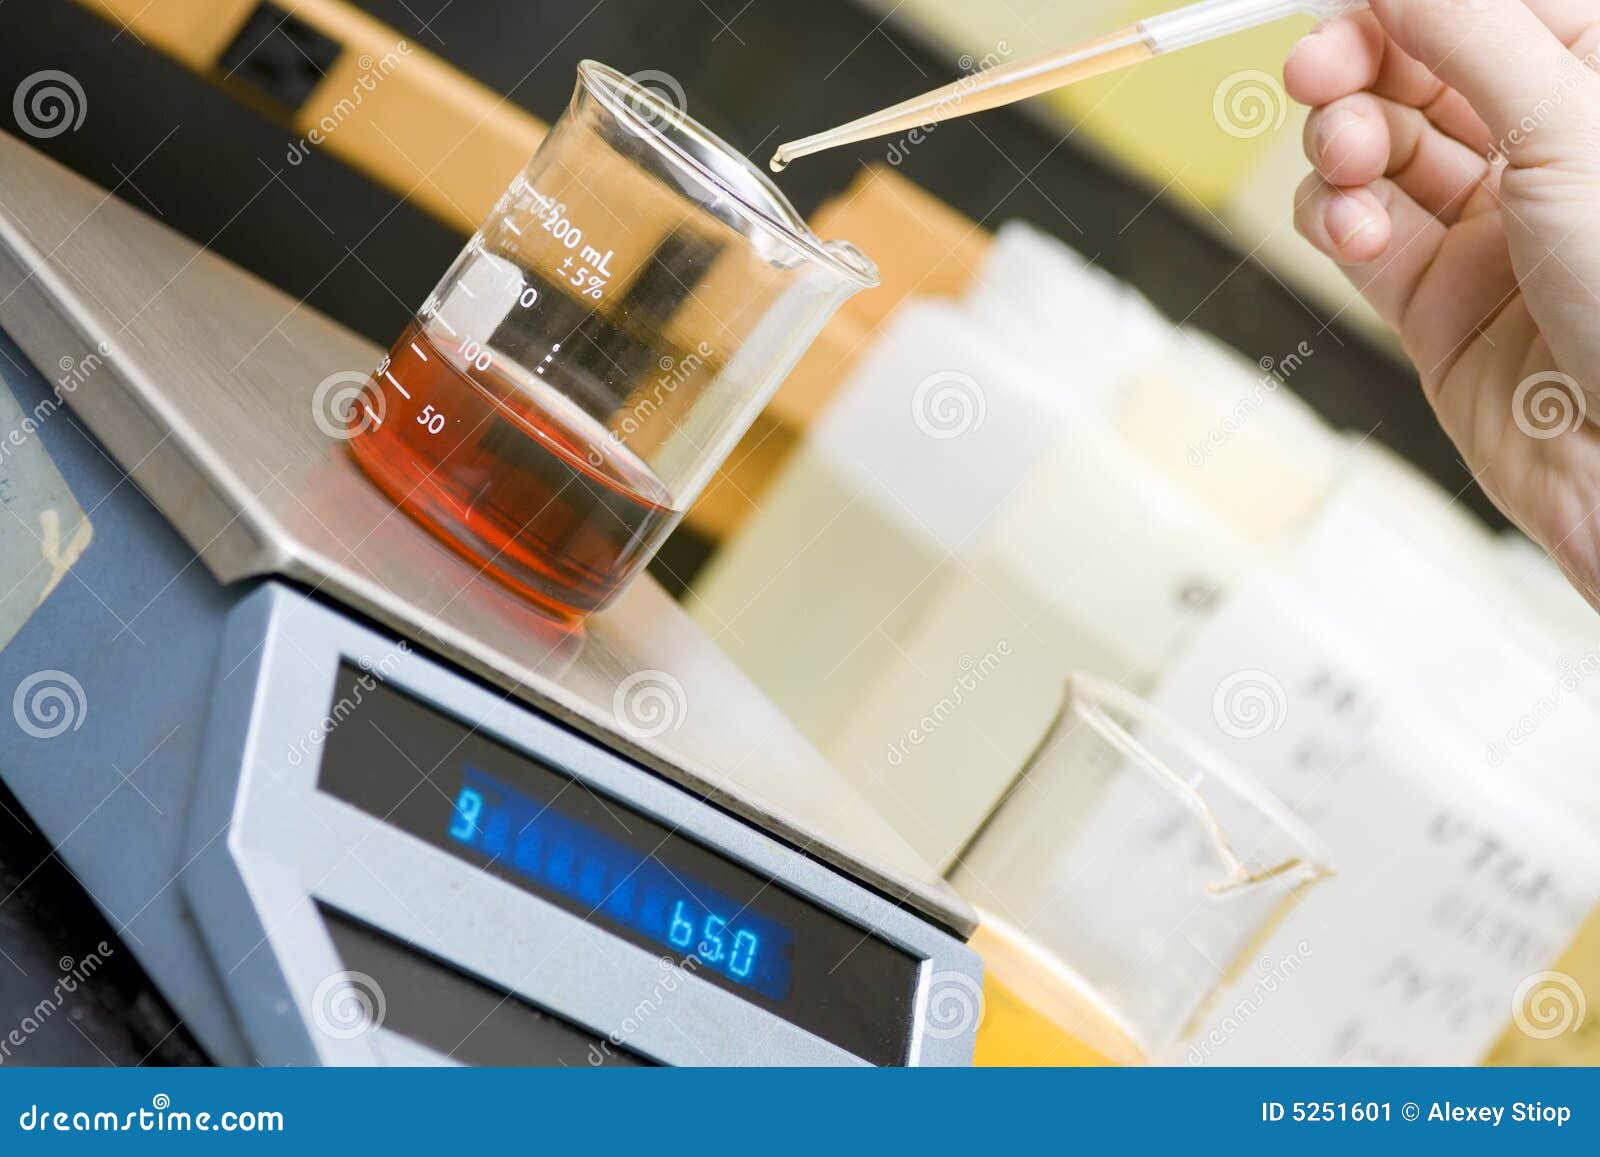 15+ Thousand Chemistry Scale Royalty-Free Images, Stock Photos & Pictures